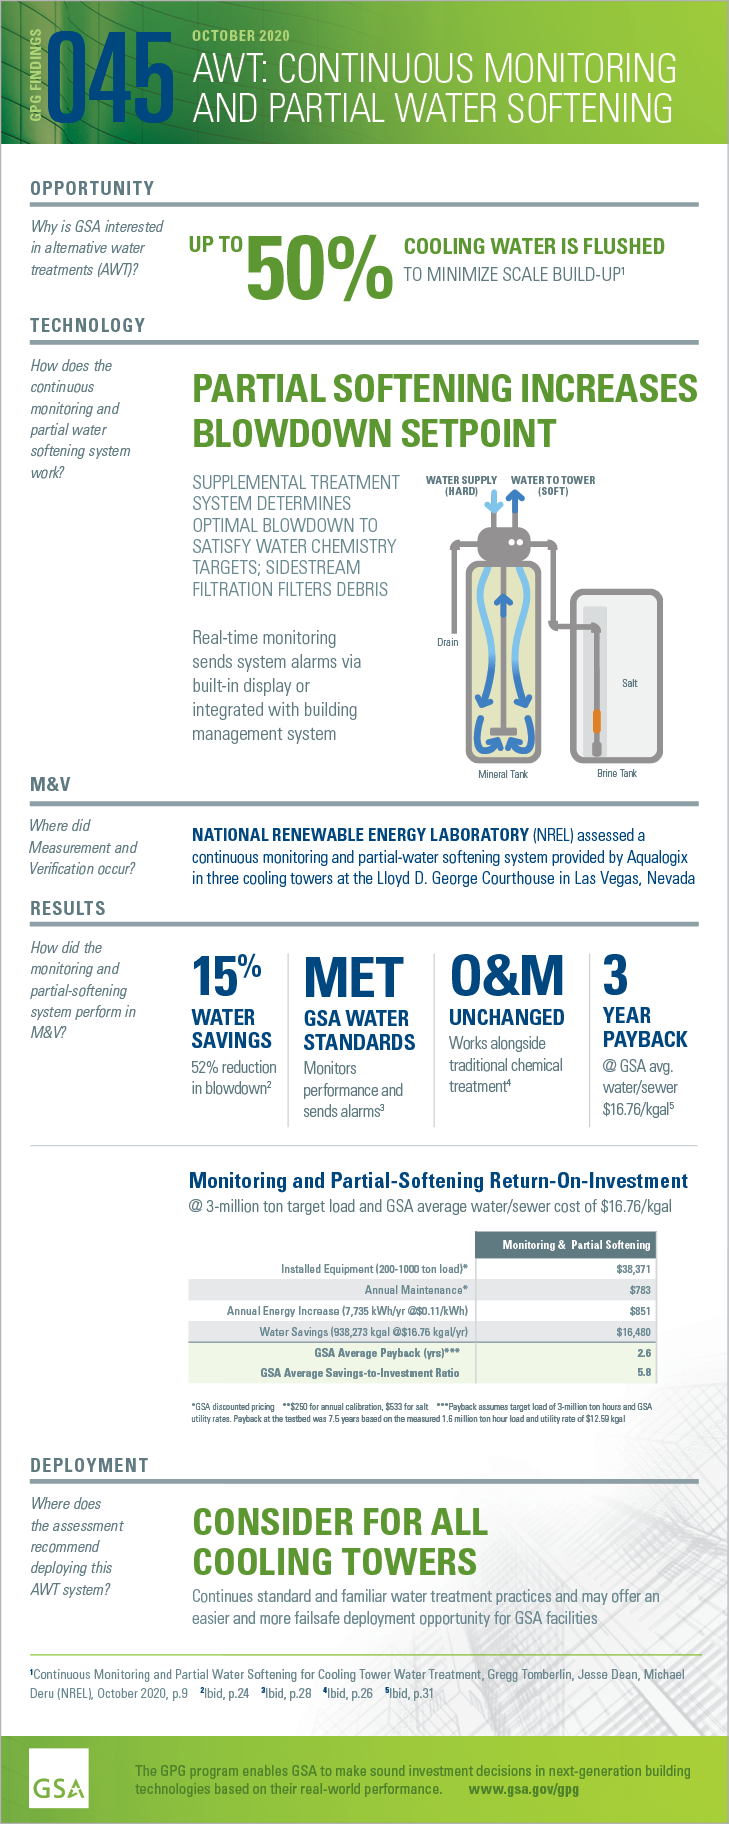 Download the PDF version of the full-sized infographic for GPG045 Monitoring and Partial Softening.